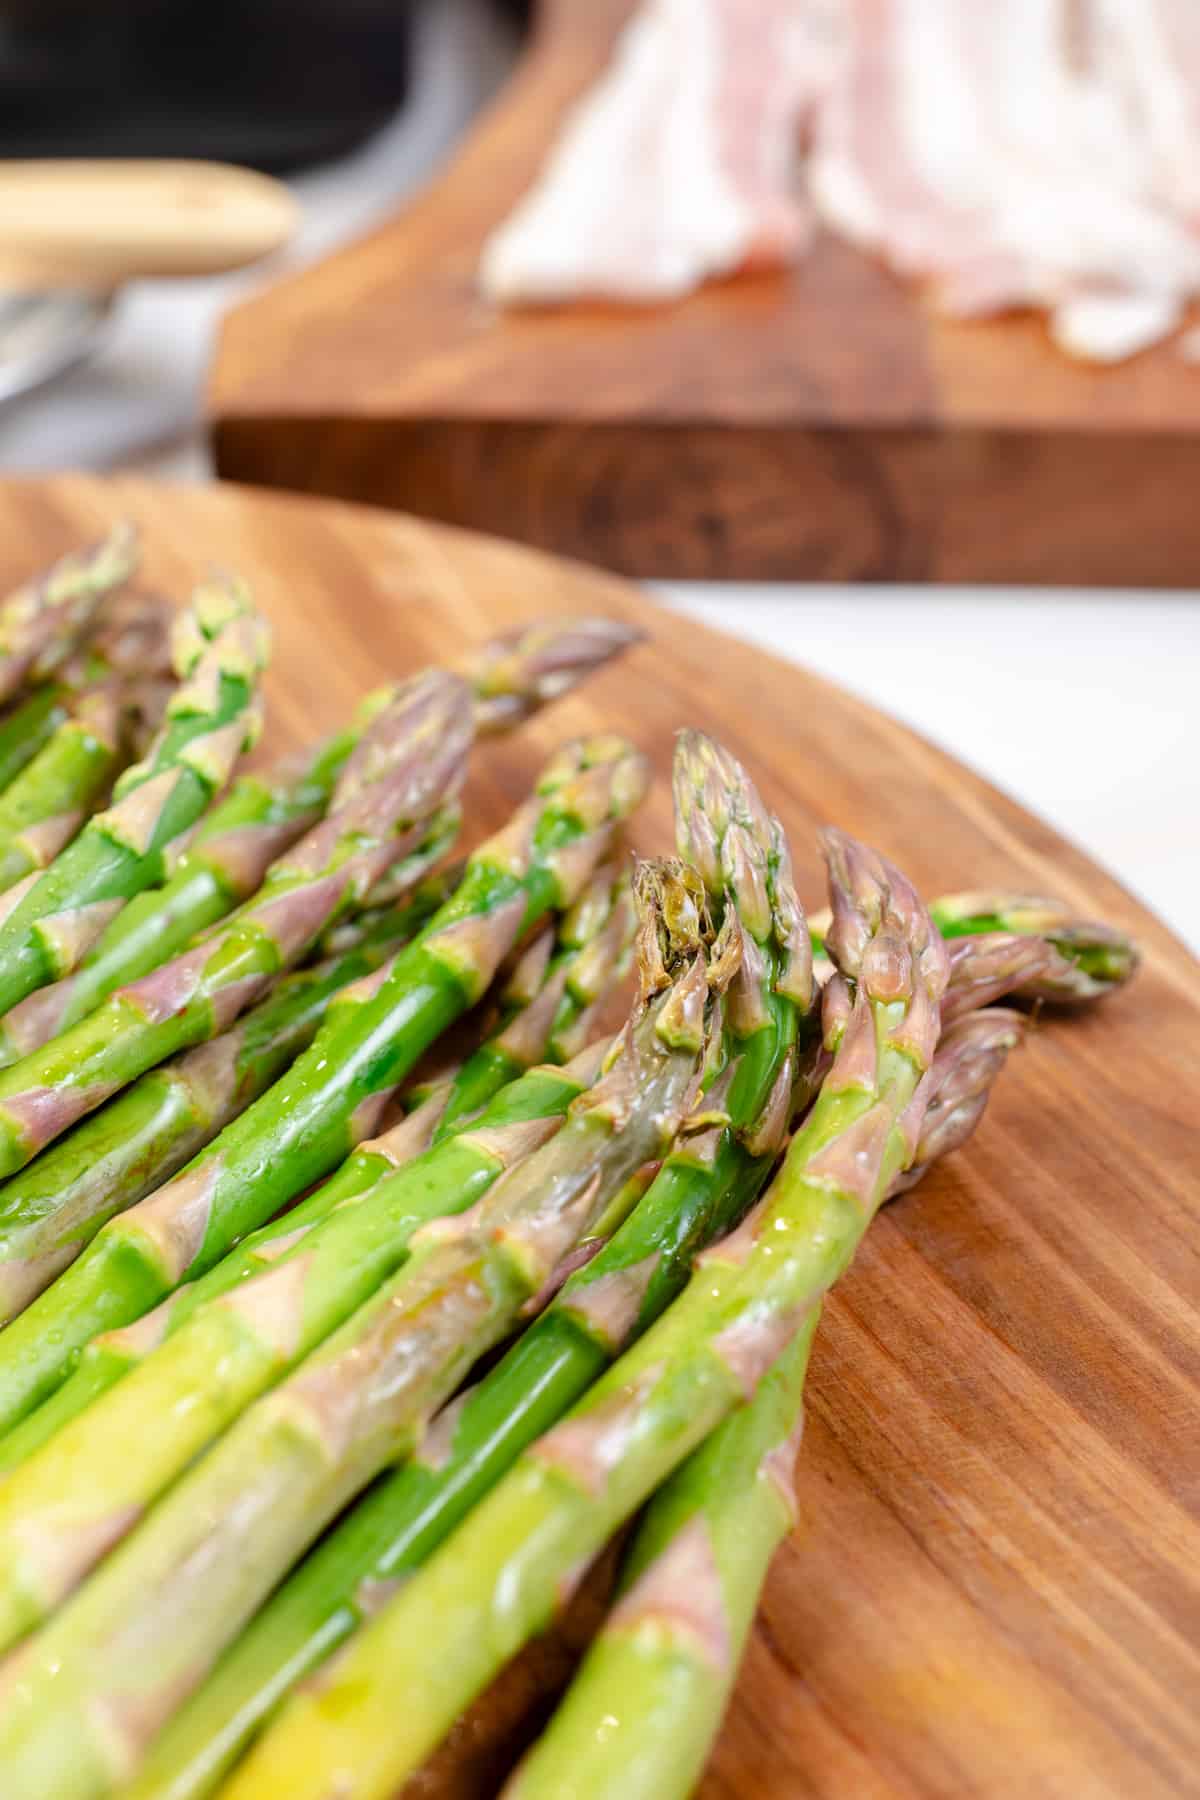 rinse and trim the asparagus spears